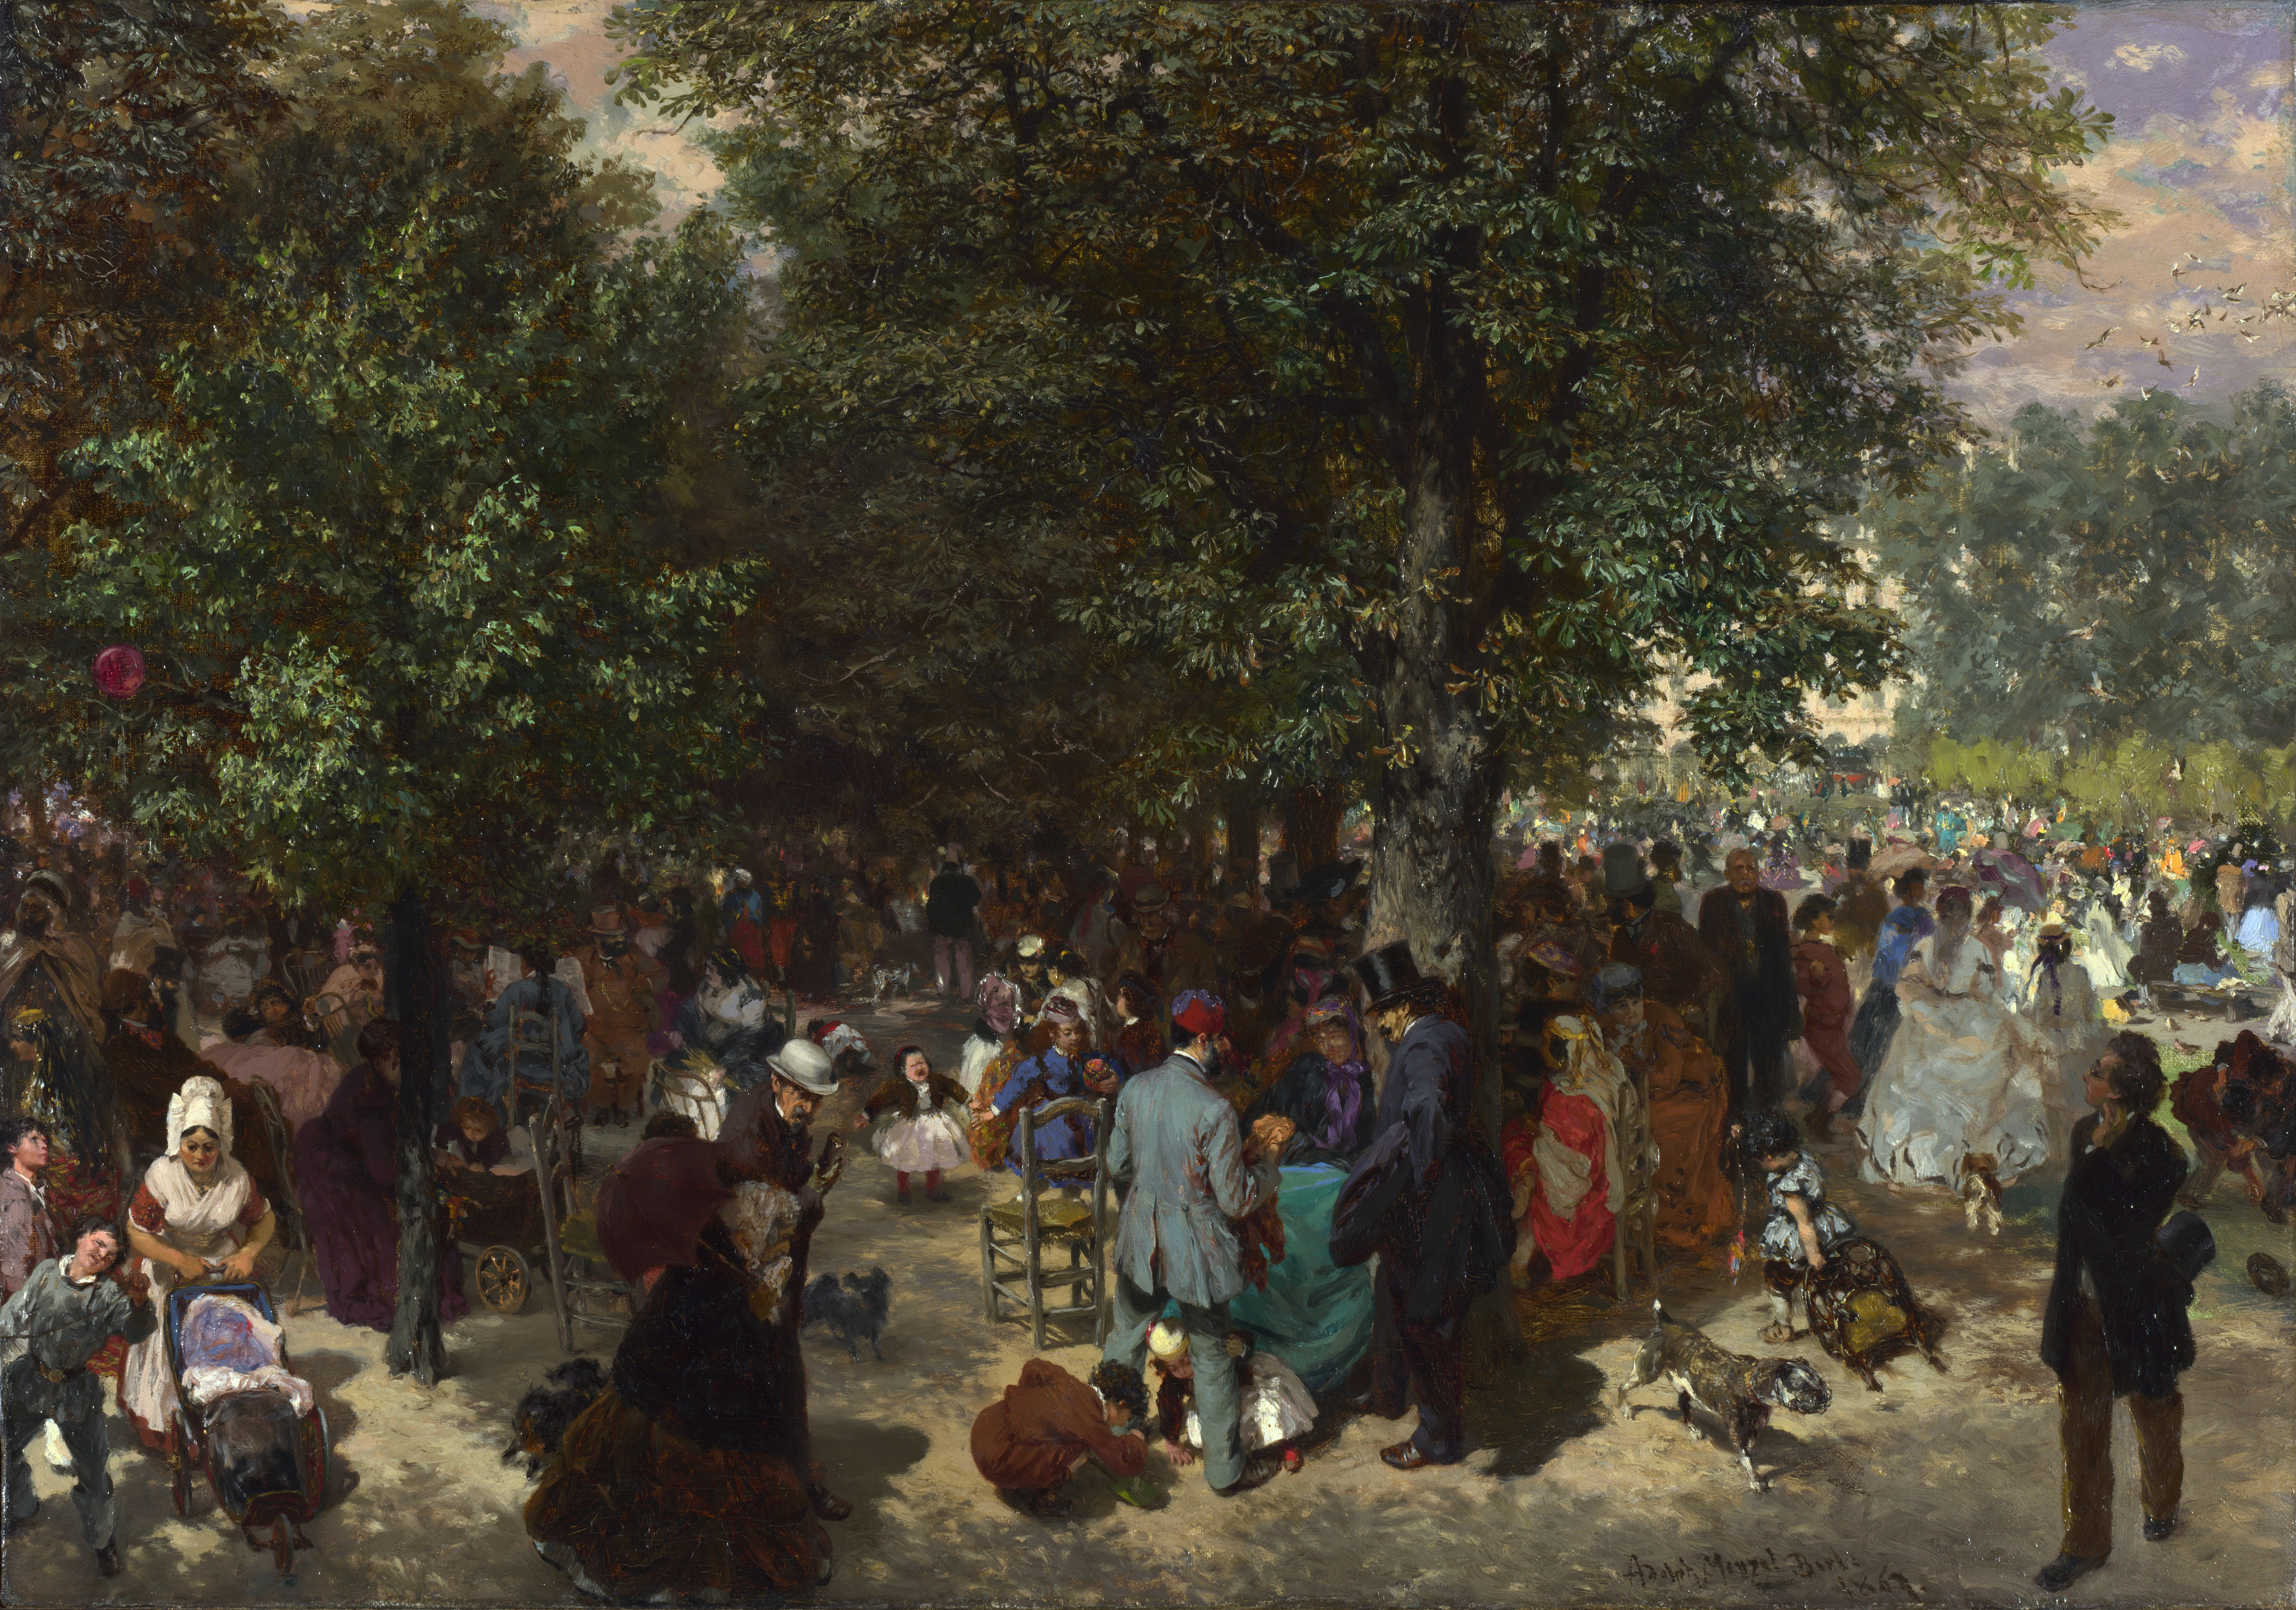 0816_Adolf menzel_Afternoon in the Tuileries Gardens 썸네일